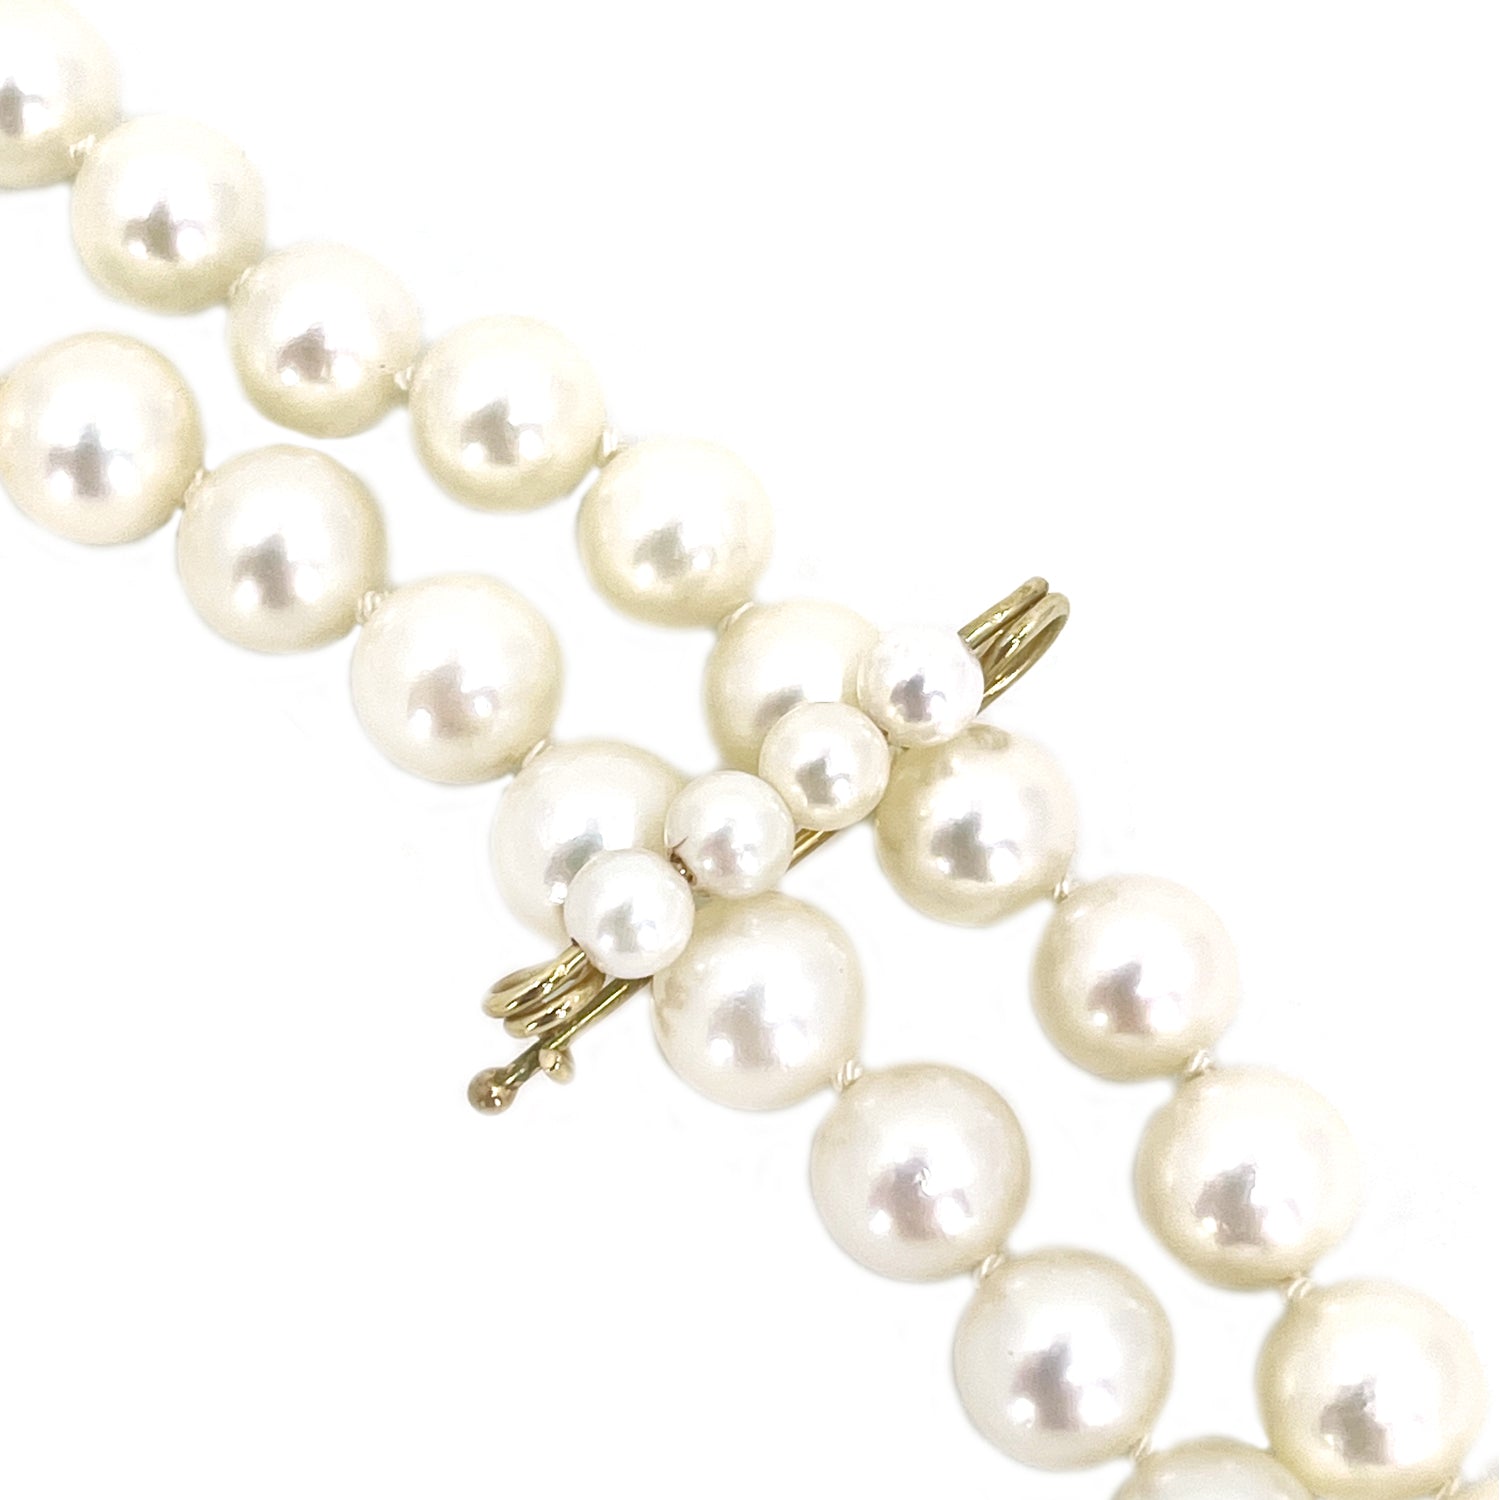 Mid Century Modern Japanese Cultured Saltwater Akoya Pearl Necklace & Shortener Pin- 14K Yellow Gold 24.50 Inch